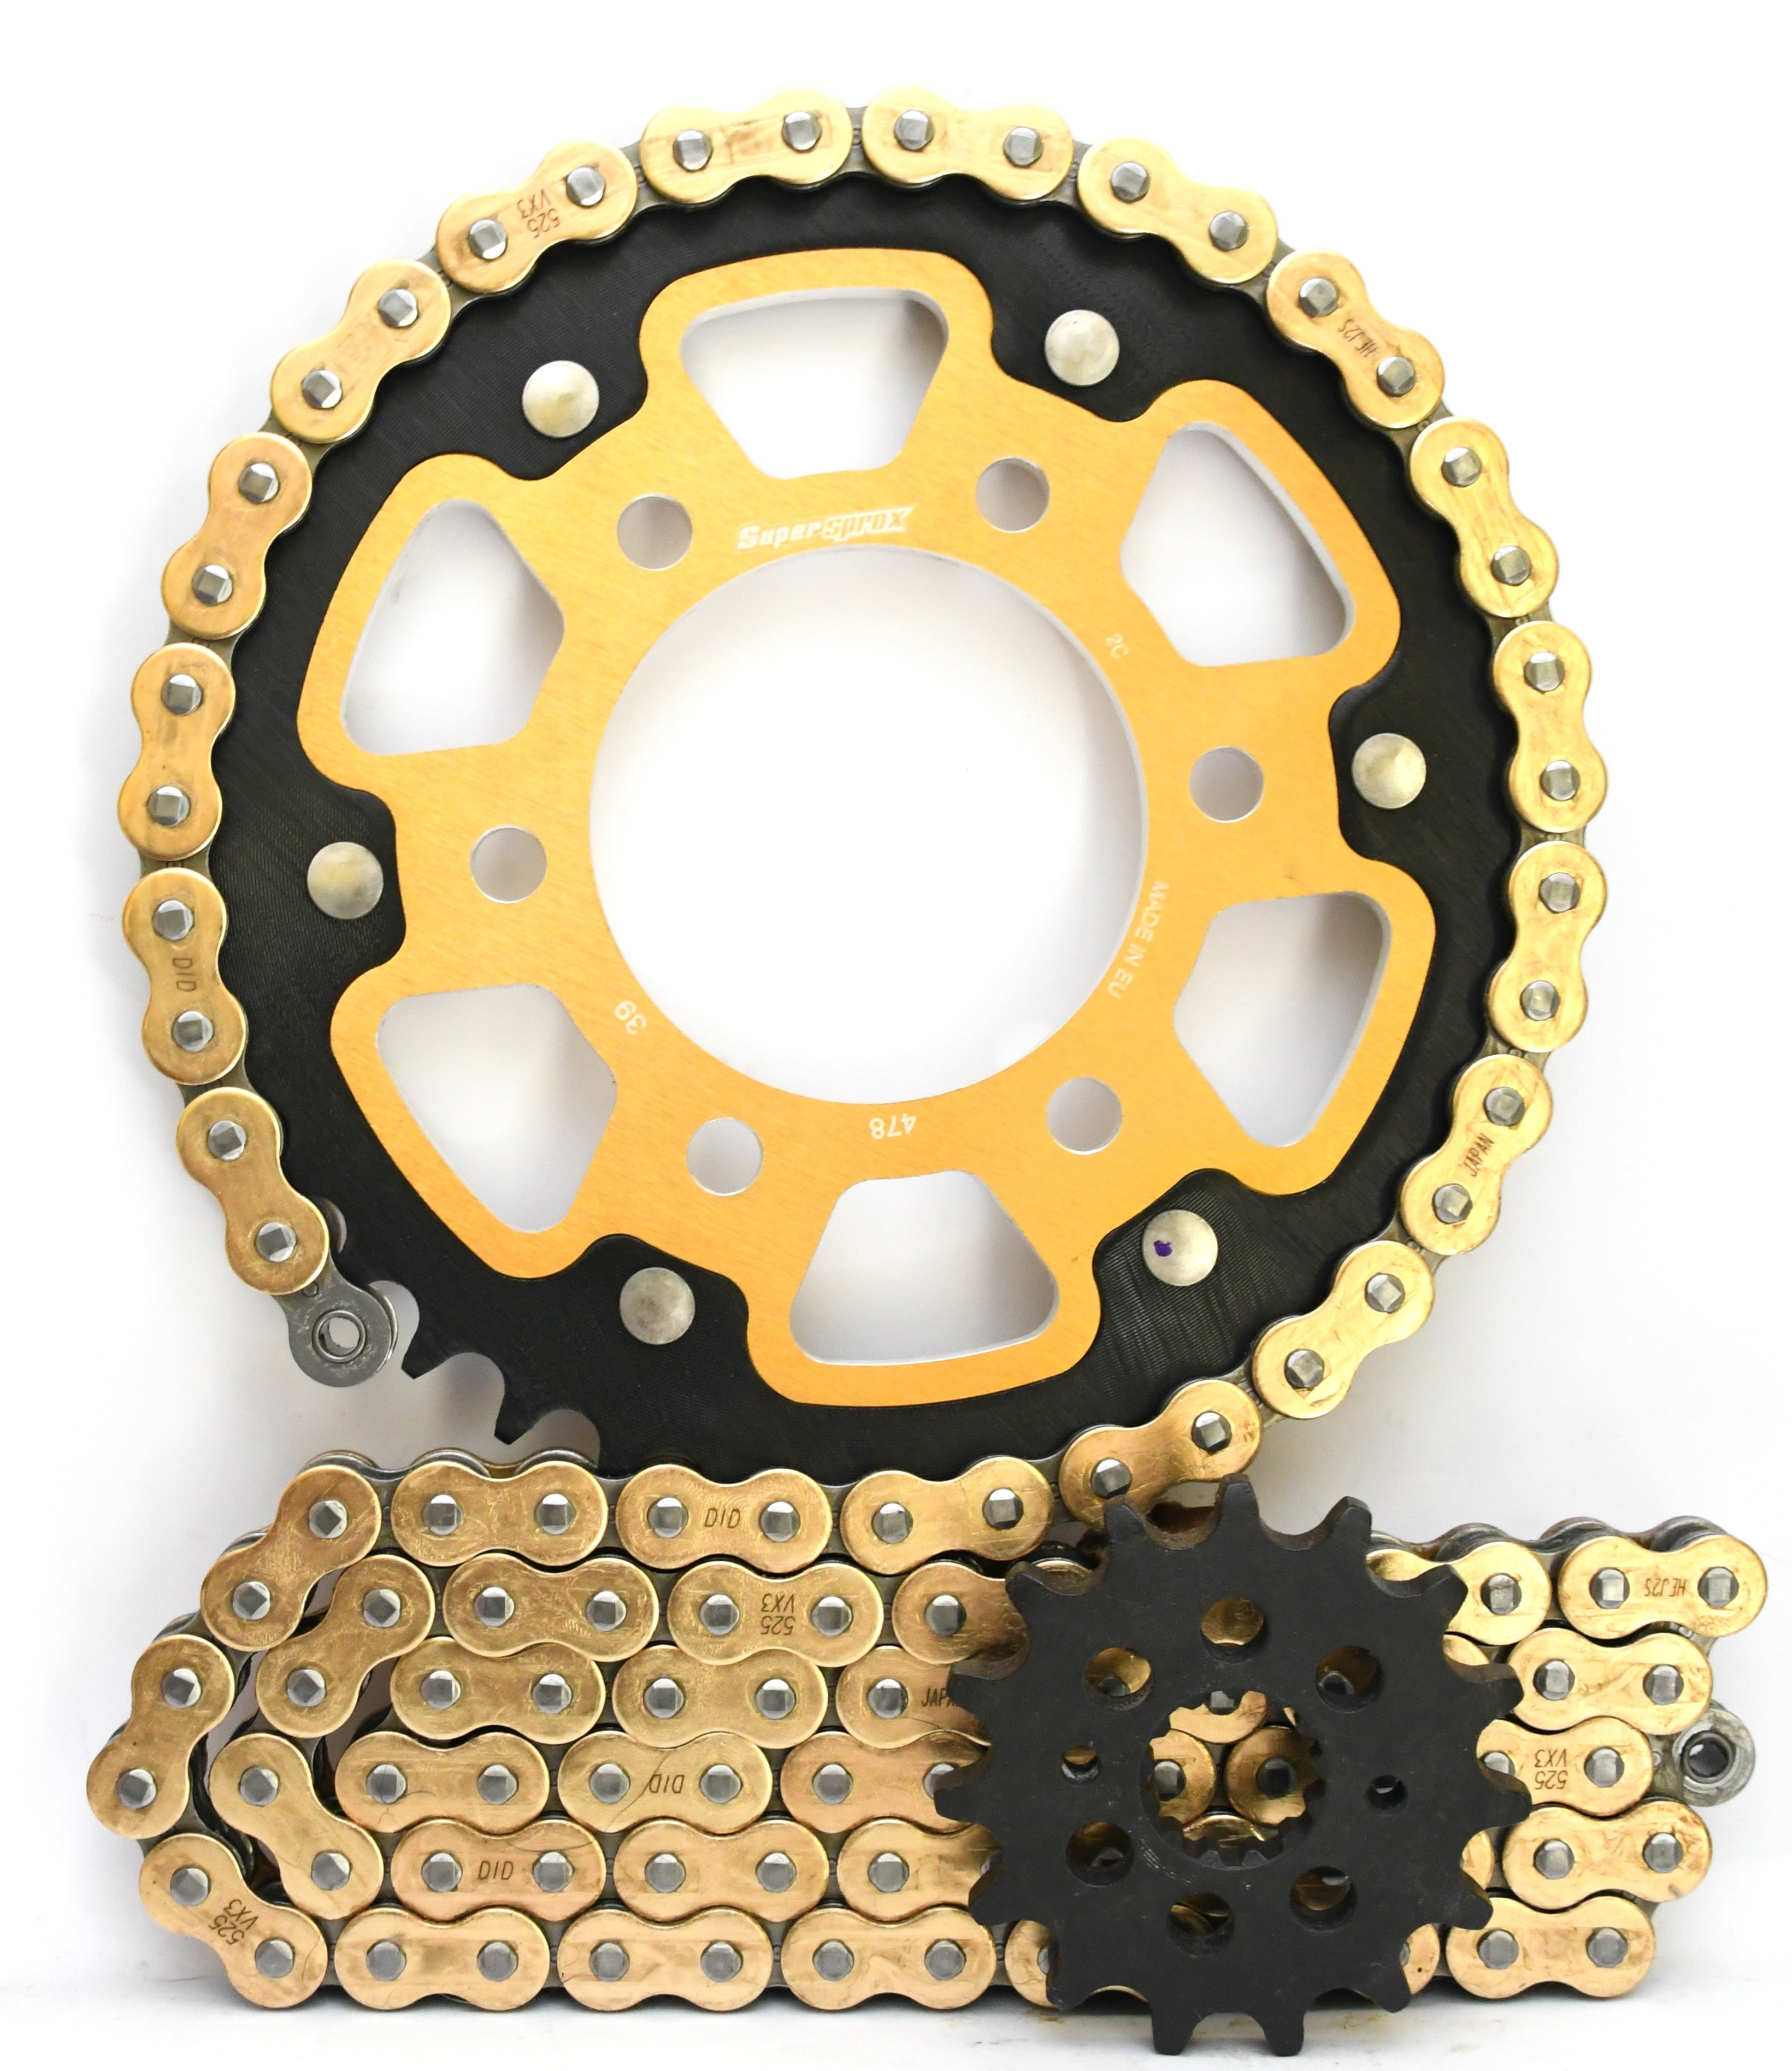 Supersprox Stealth and DID 520 Conversion Chain & Sprocket Kit for Kawasaki ZX-10R 2008-2010 - Standard Gearing